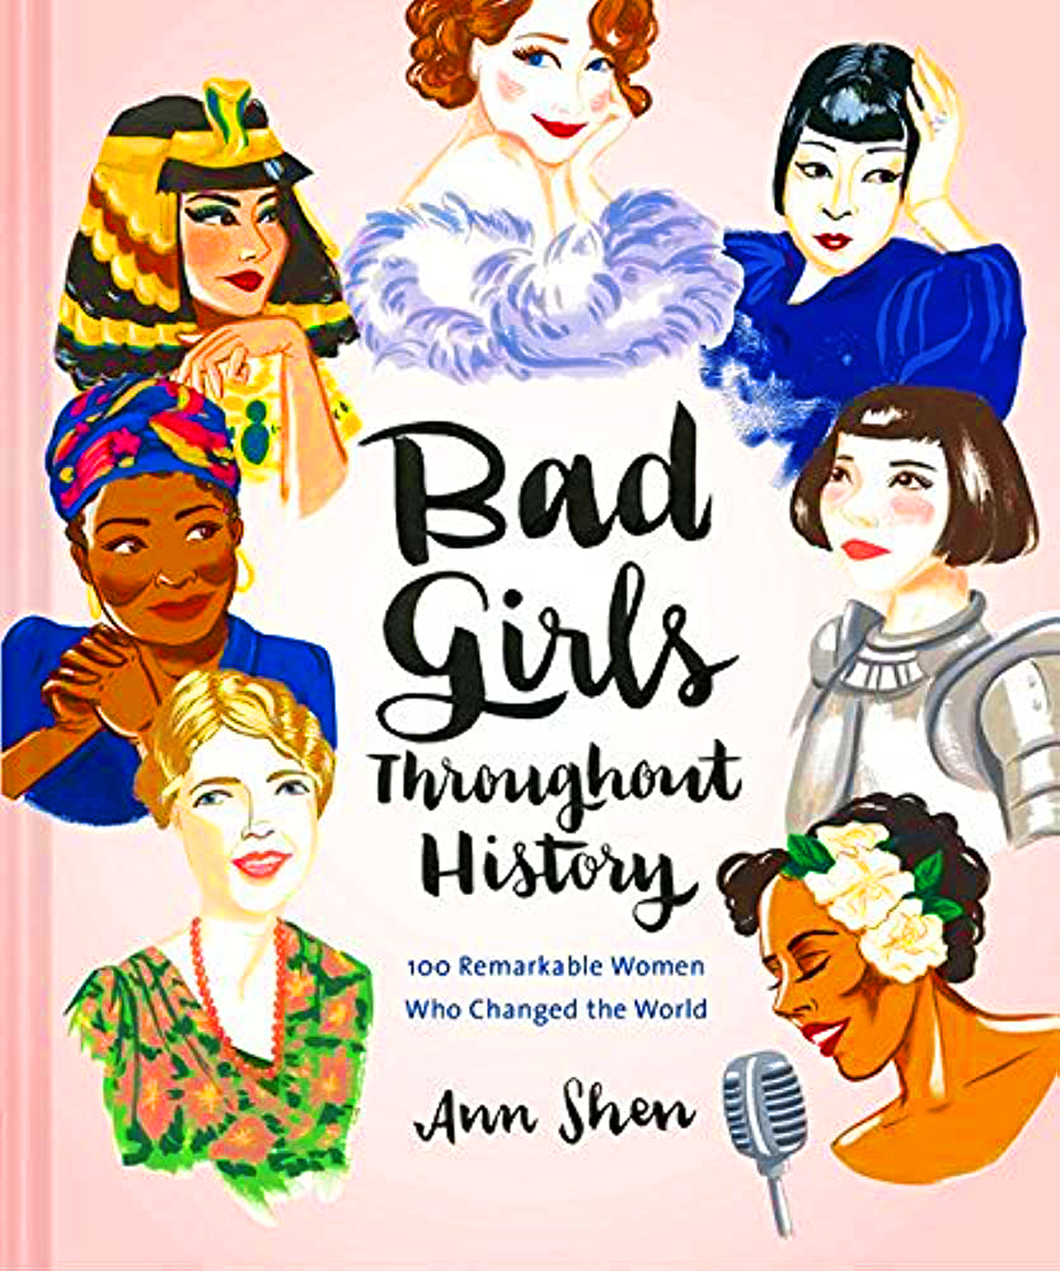 Bad Girls Throughout History: 100 Remarkable Women Who Changed the World by Ann Shen / BOOK OR BUNDLE - Starting at $20